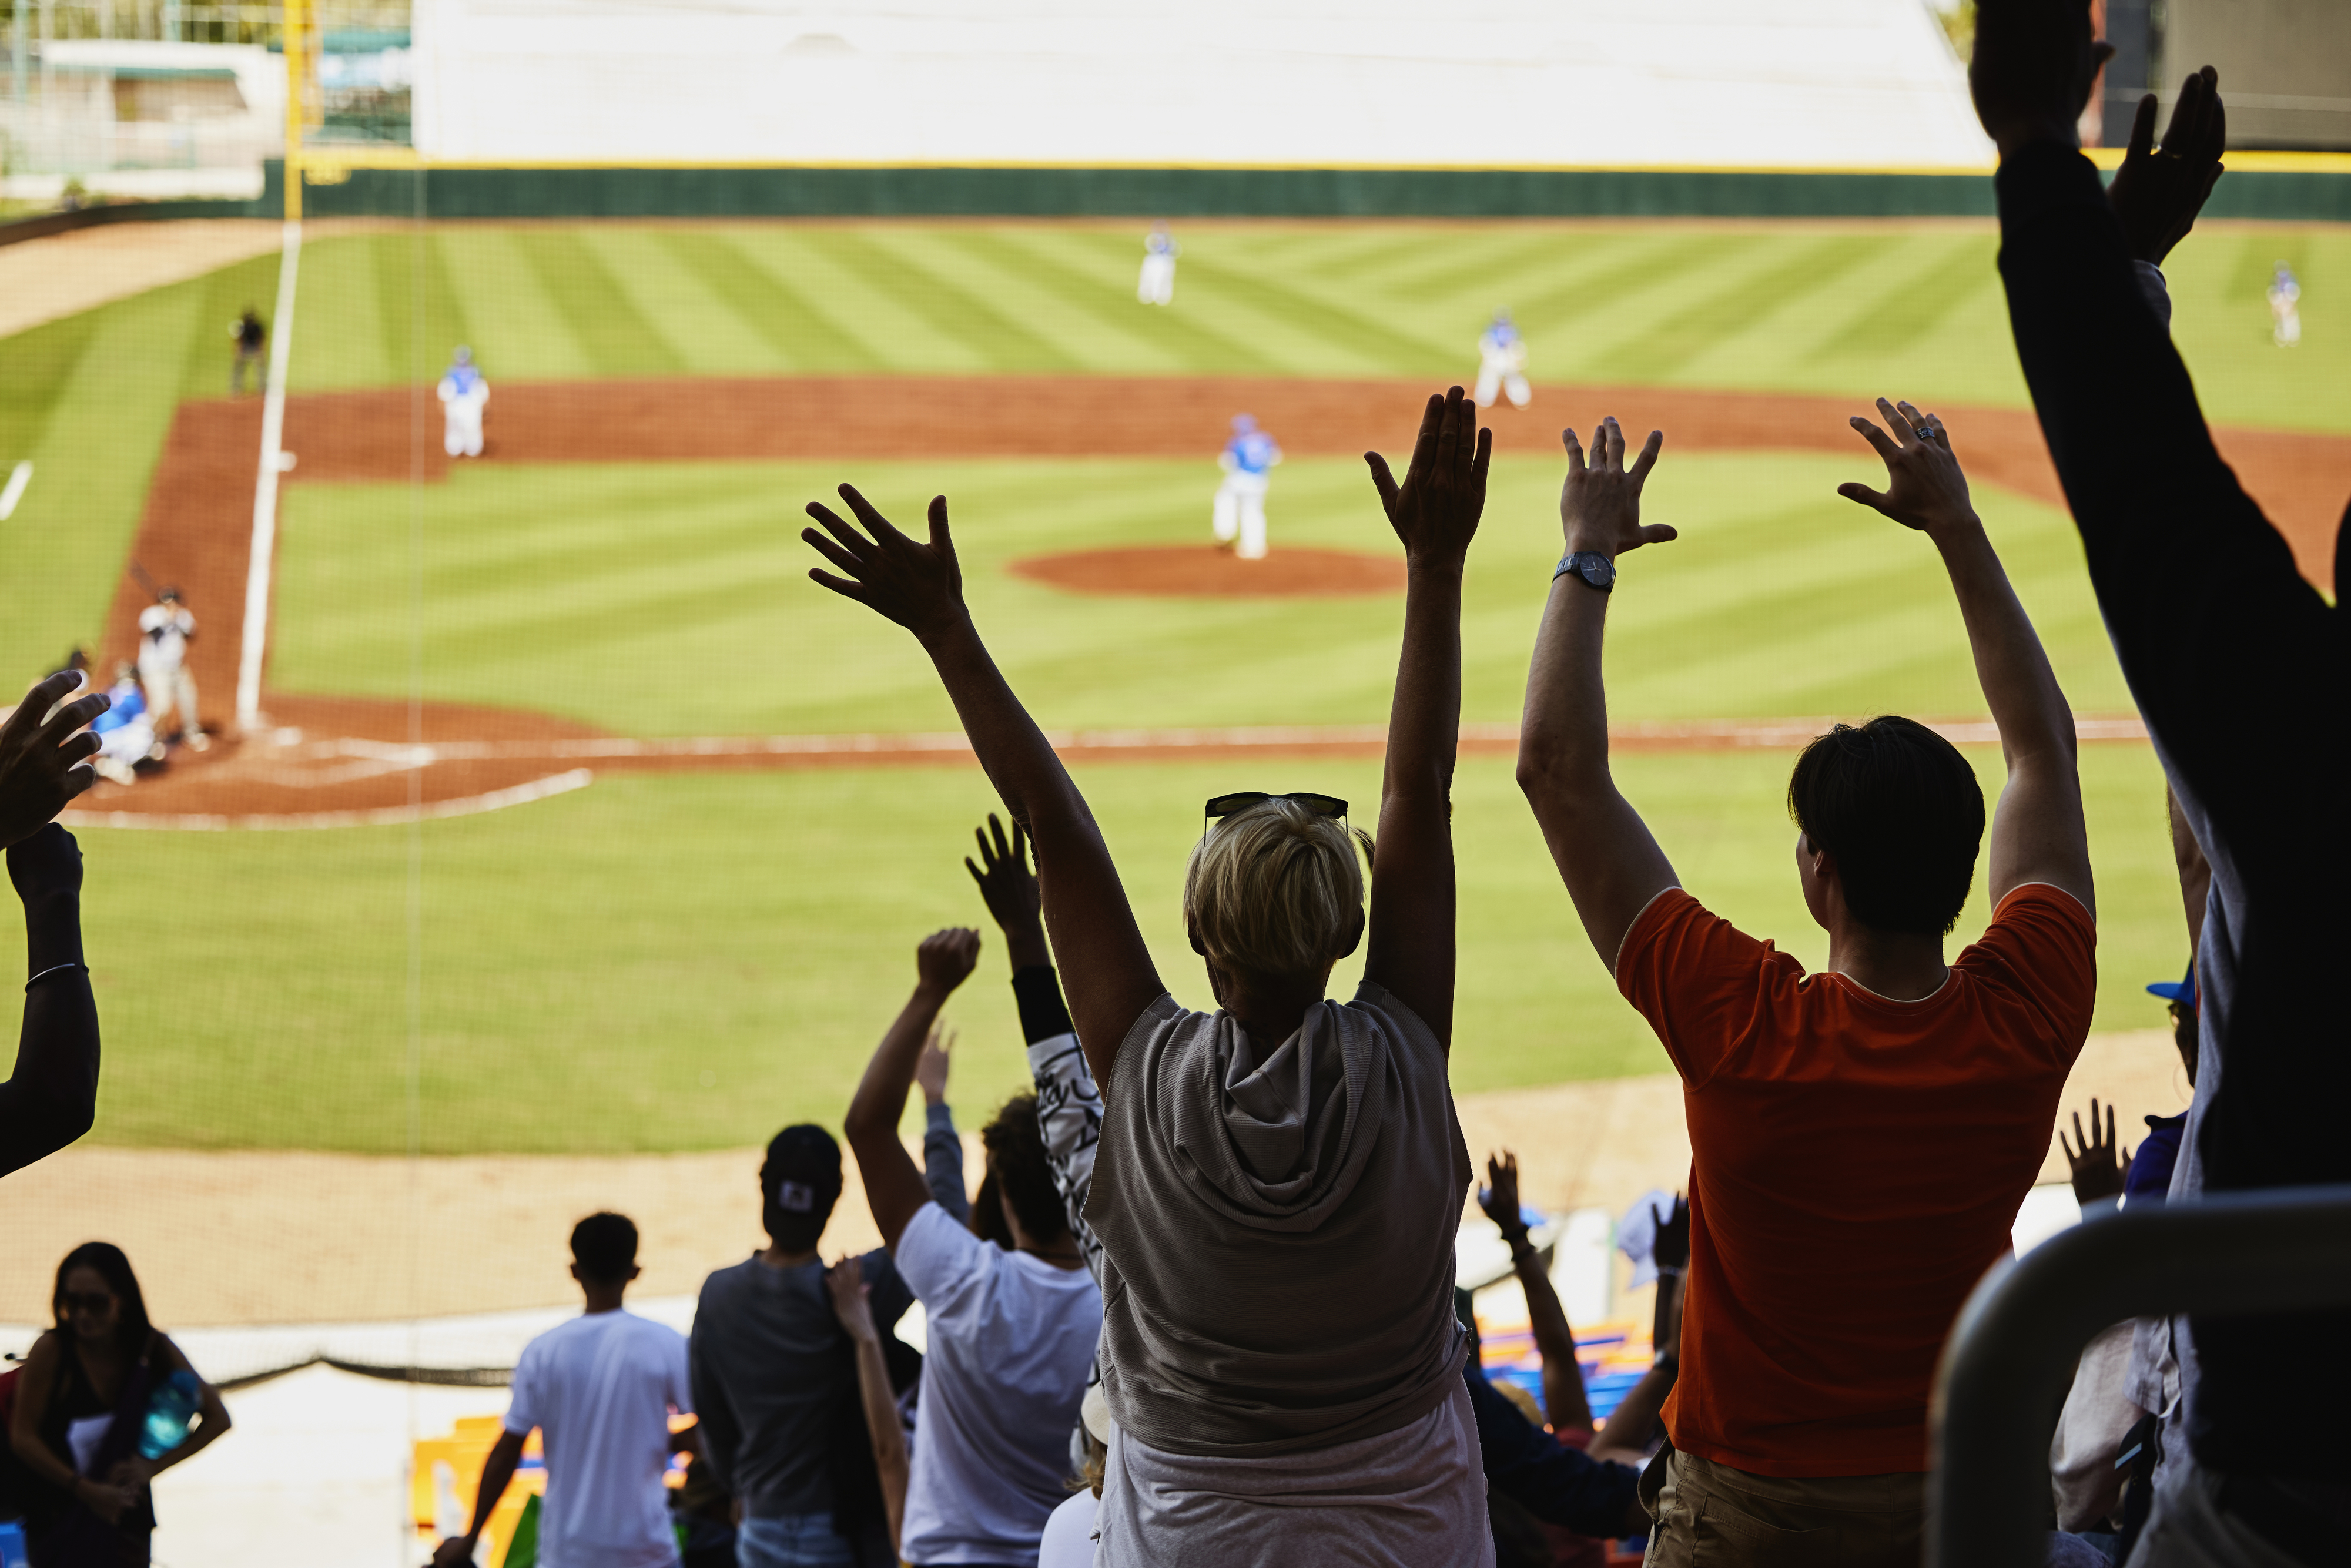 Fans watching a baseball game in a stadium